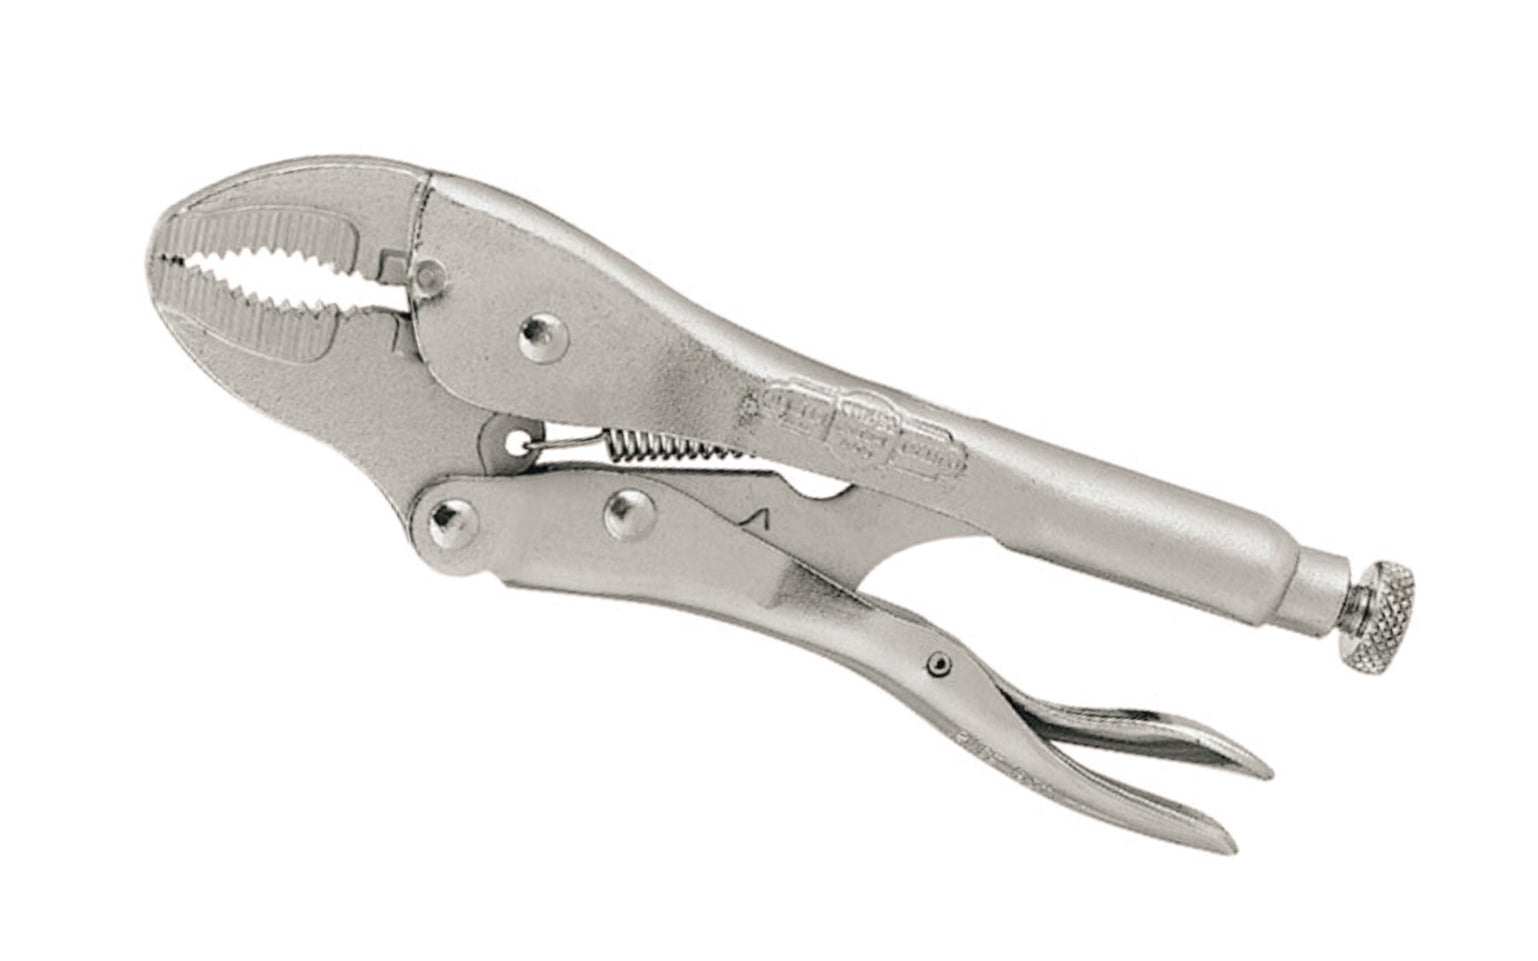 Irwin 7" "The Original" Vise Grip Locking Nose Plier. Model 7WR. Item No. 4935578. Turn screw to adjust pressure & fit work. Stays adjusted for repetitive use. Constructed of high-grade heat-treated alloy steel for maximum toughness & durability. Hardened teeth are designed to grip from any angle. 1-1/2" Jaw Capacity.